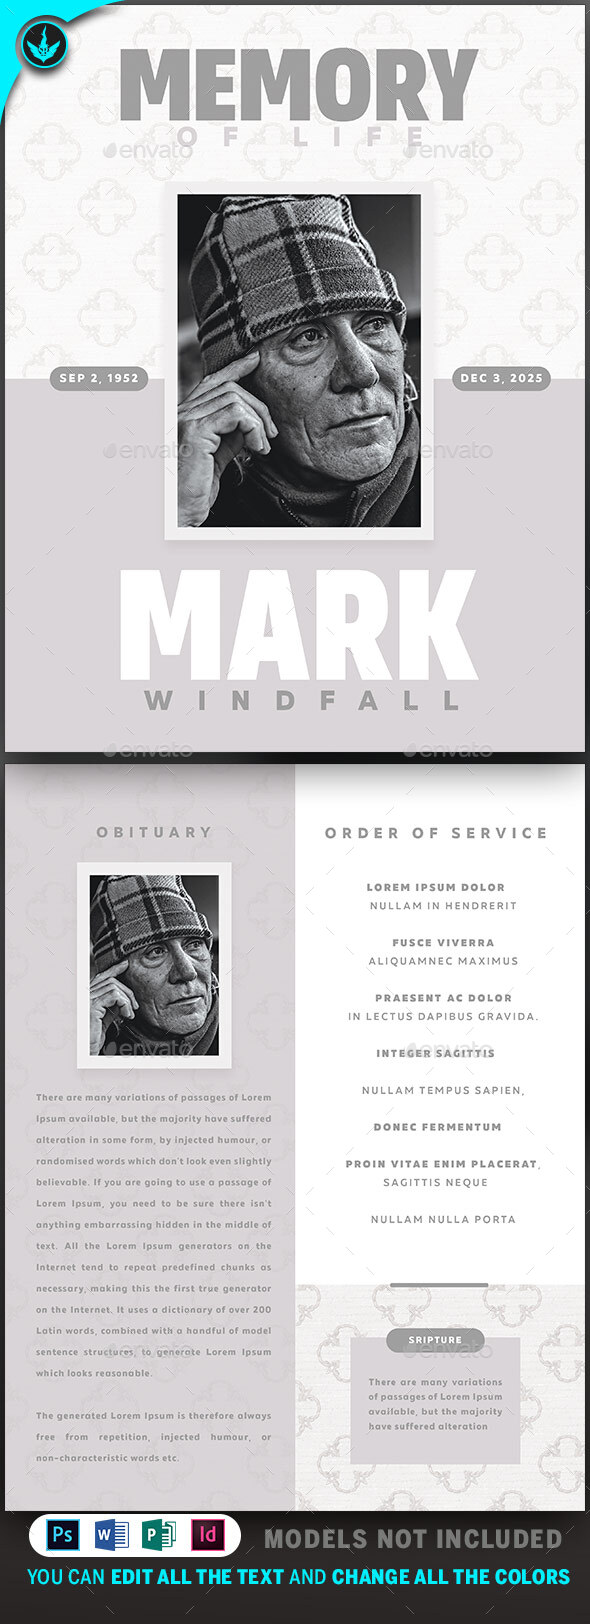 Simple Funeral Program Template Free from previews.customer.envatousercontent.com